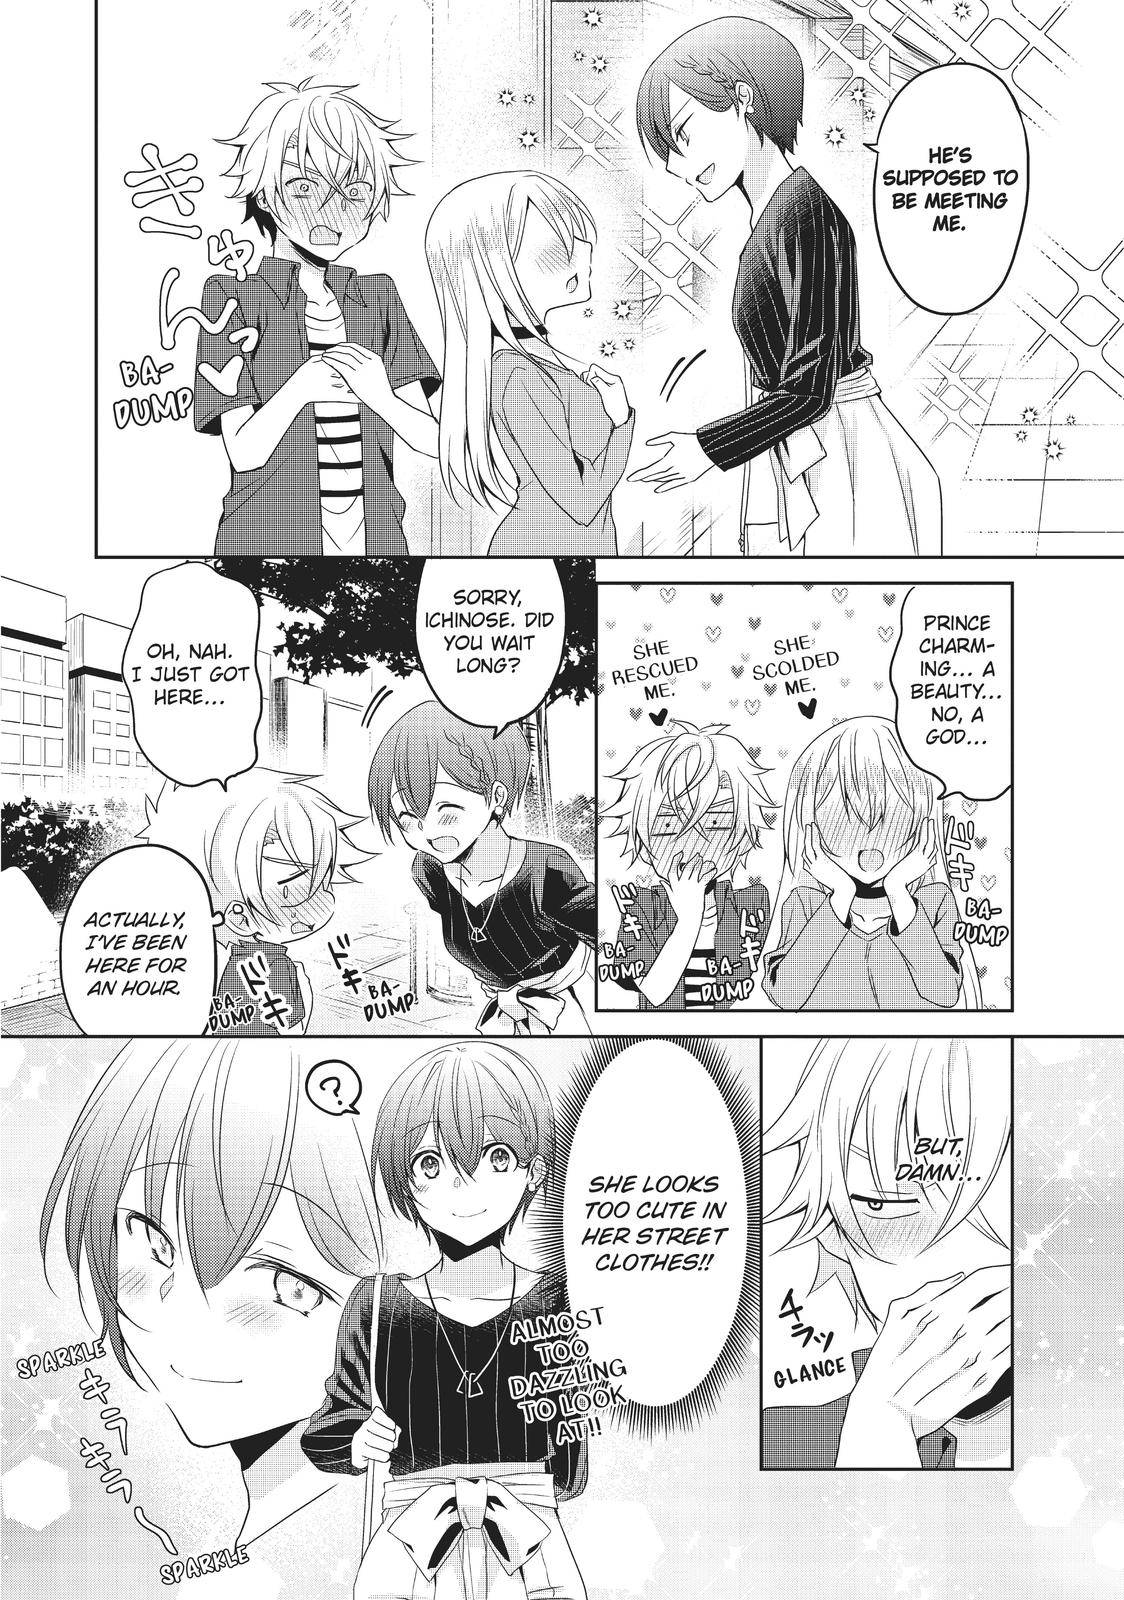 The Story Of The Girl I Like Being Too Ikemen - chapter 11 - #2